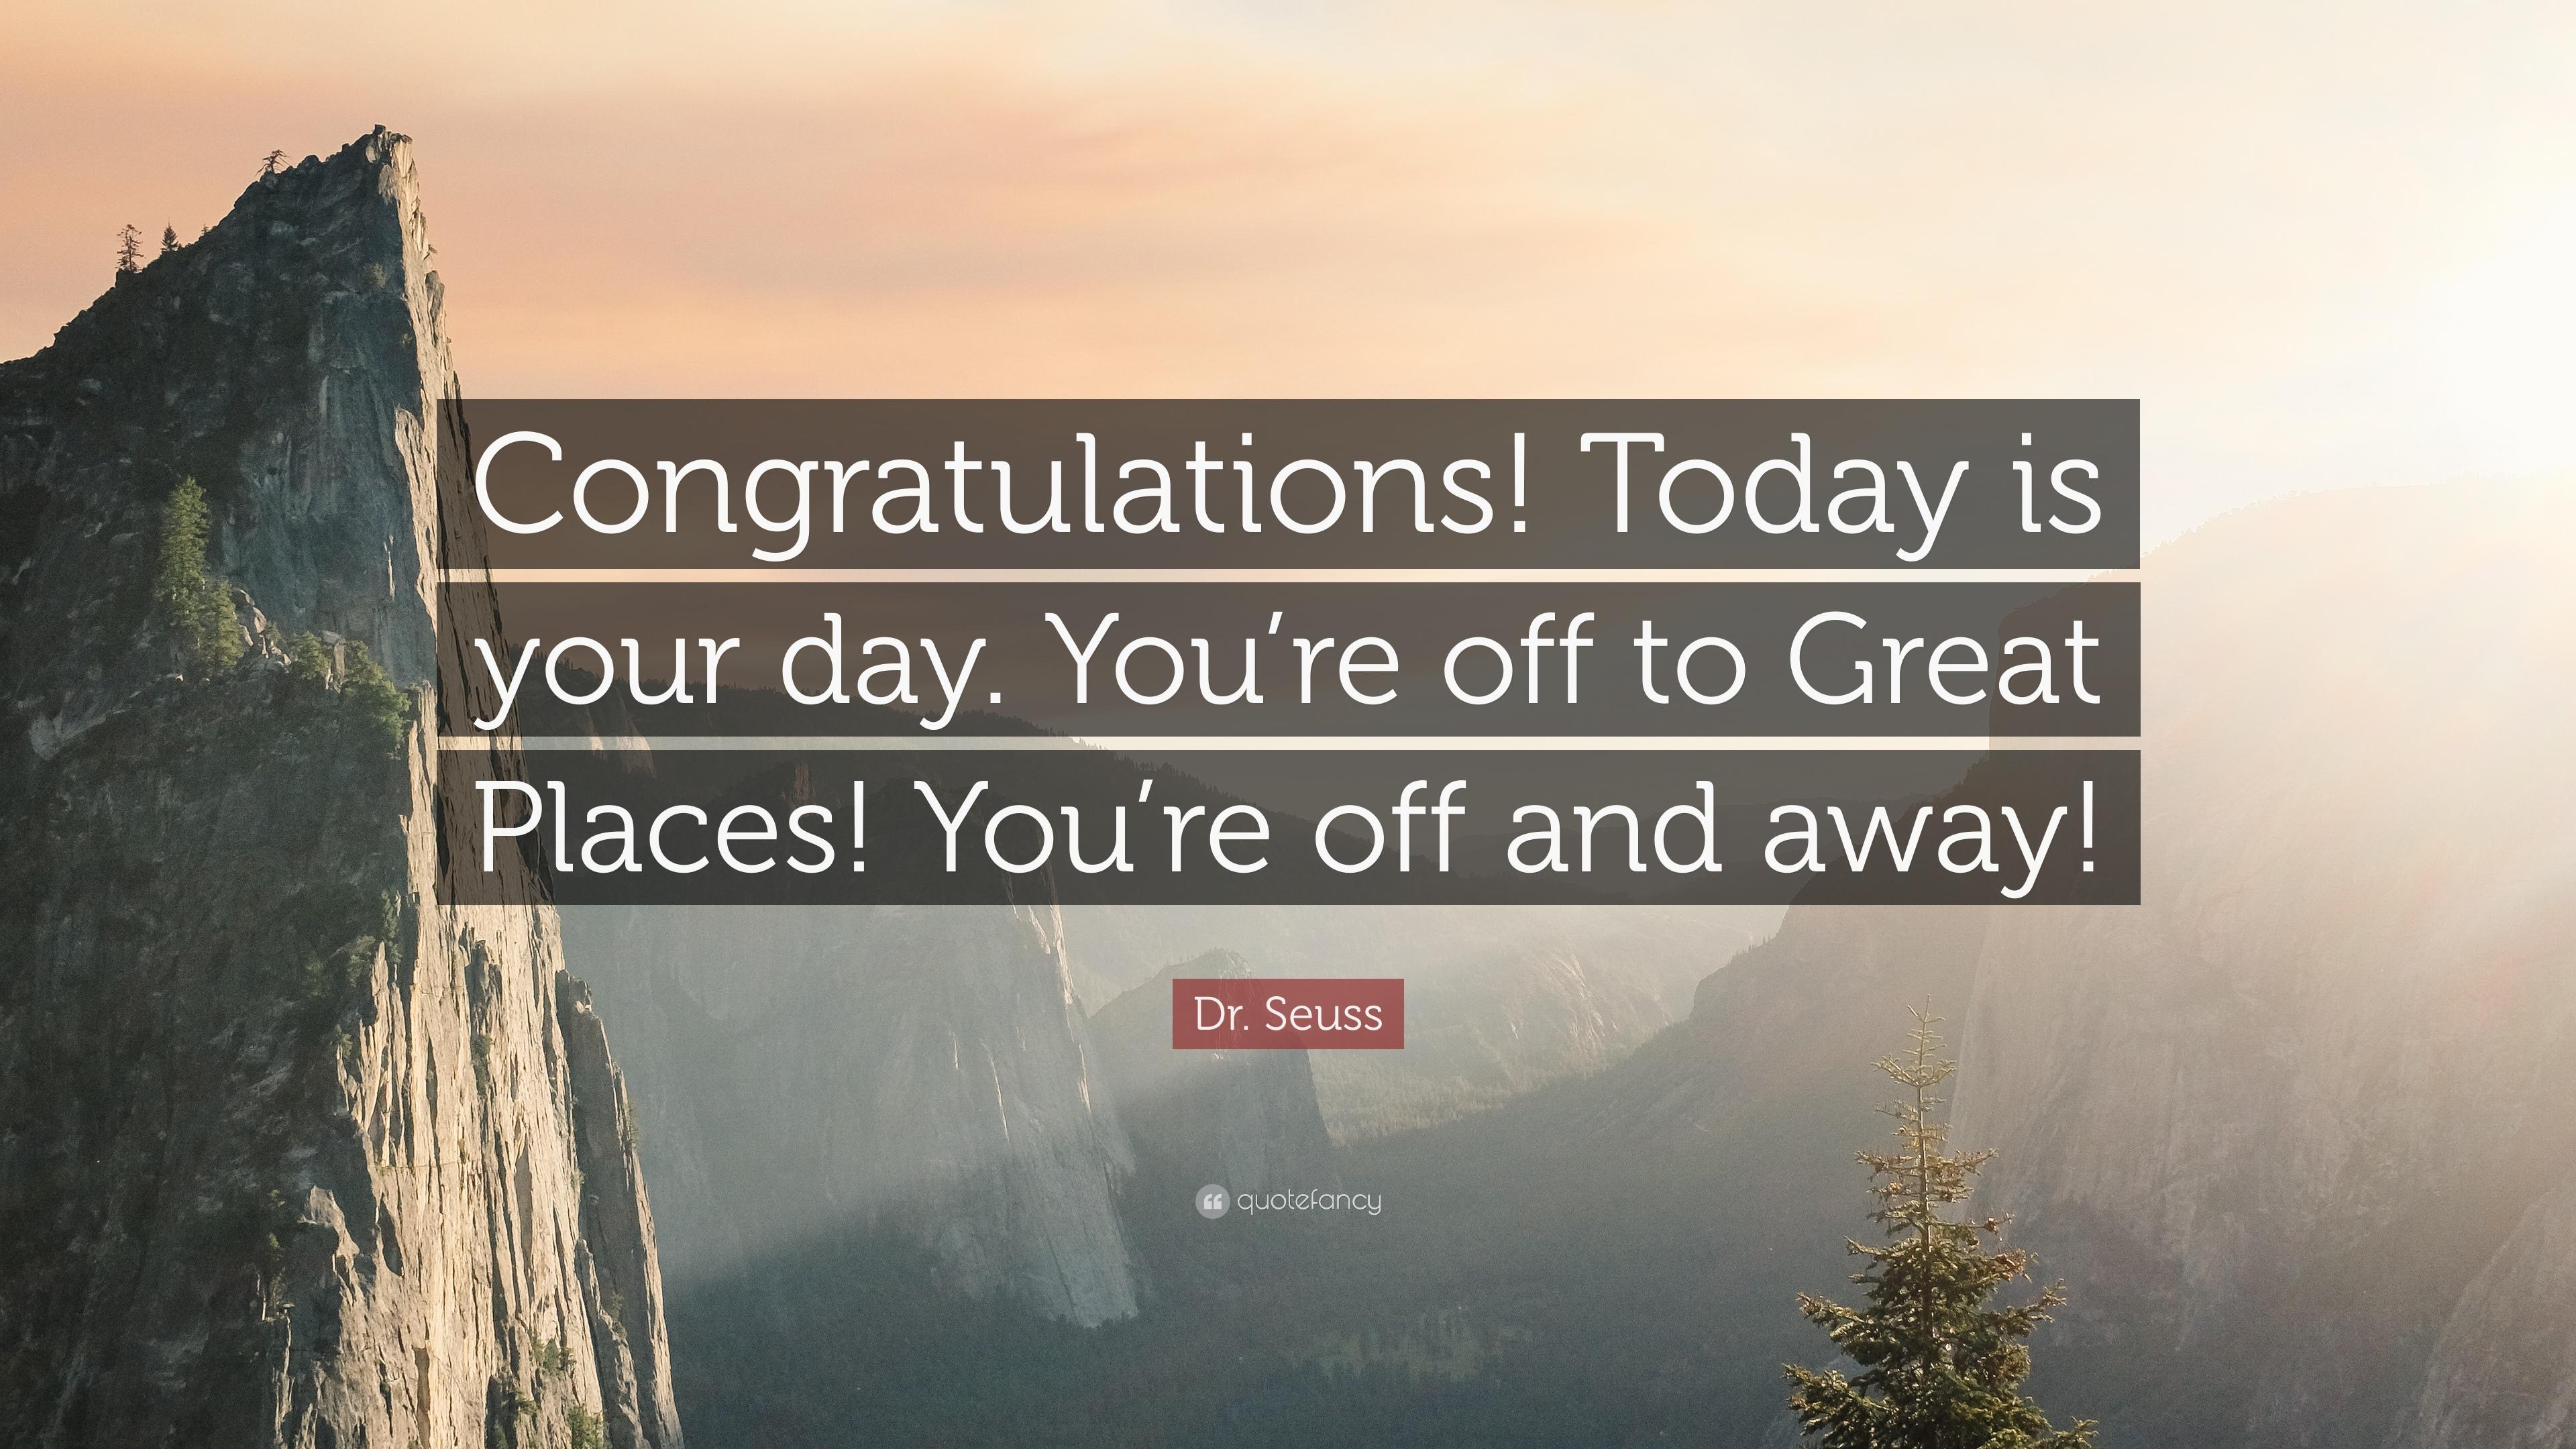 Dr. Seuss Quote: “Congratulations! Today is your day. You're off to